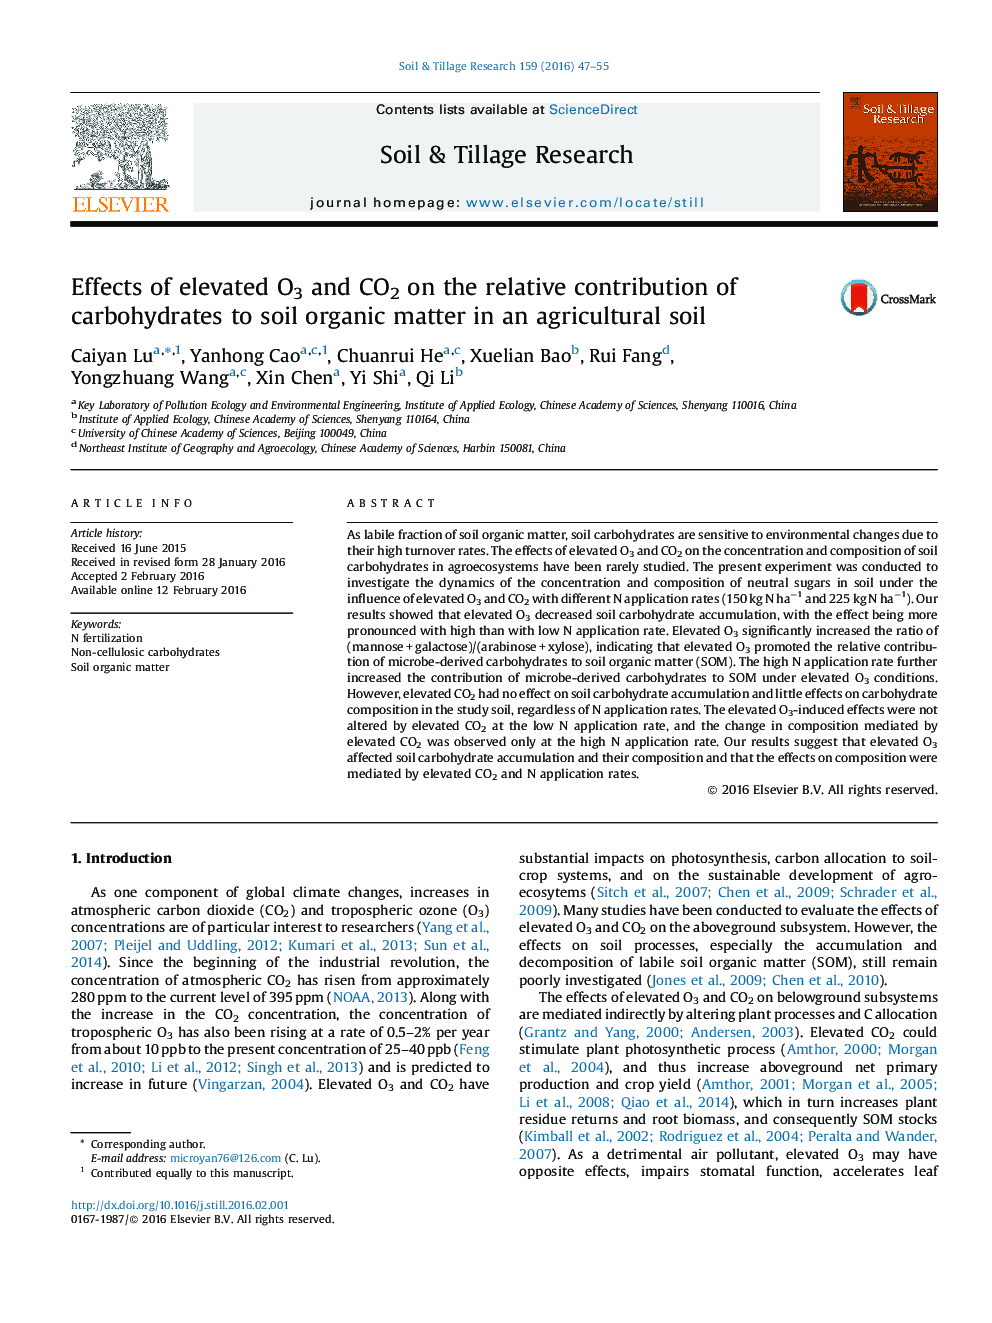 Effects of elevated O3 and CO2 on the relative contribution of carbohydrates to soil organic matter in an agricultural soil